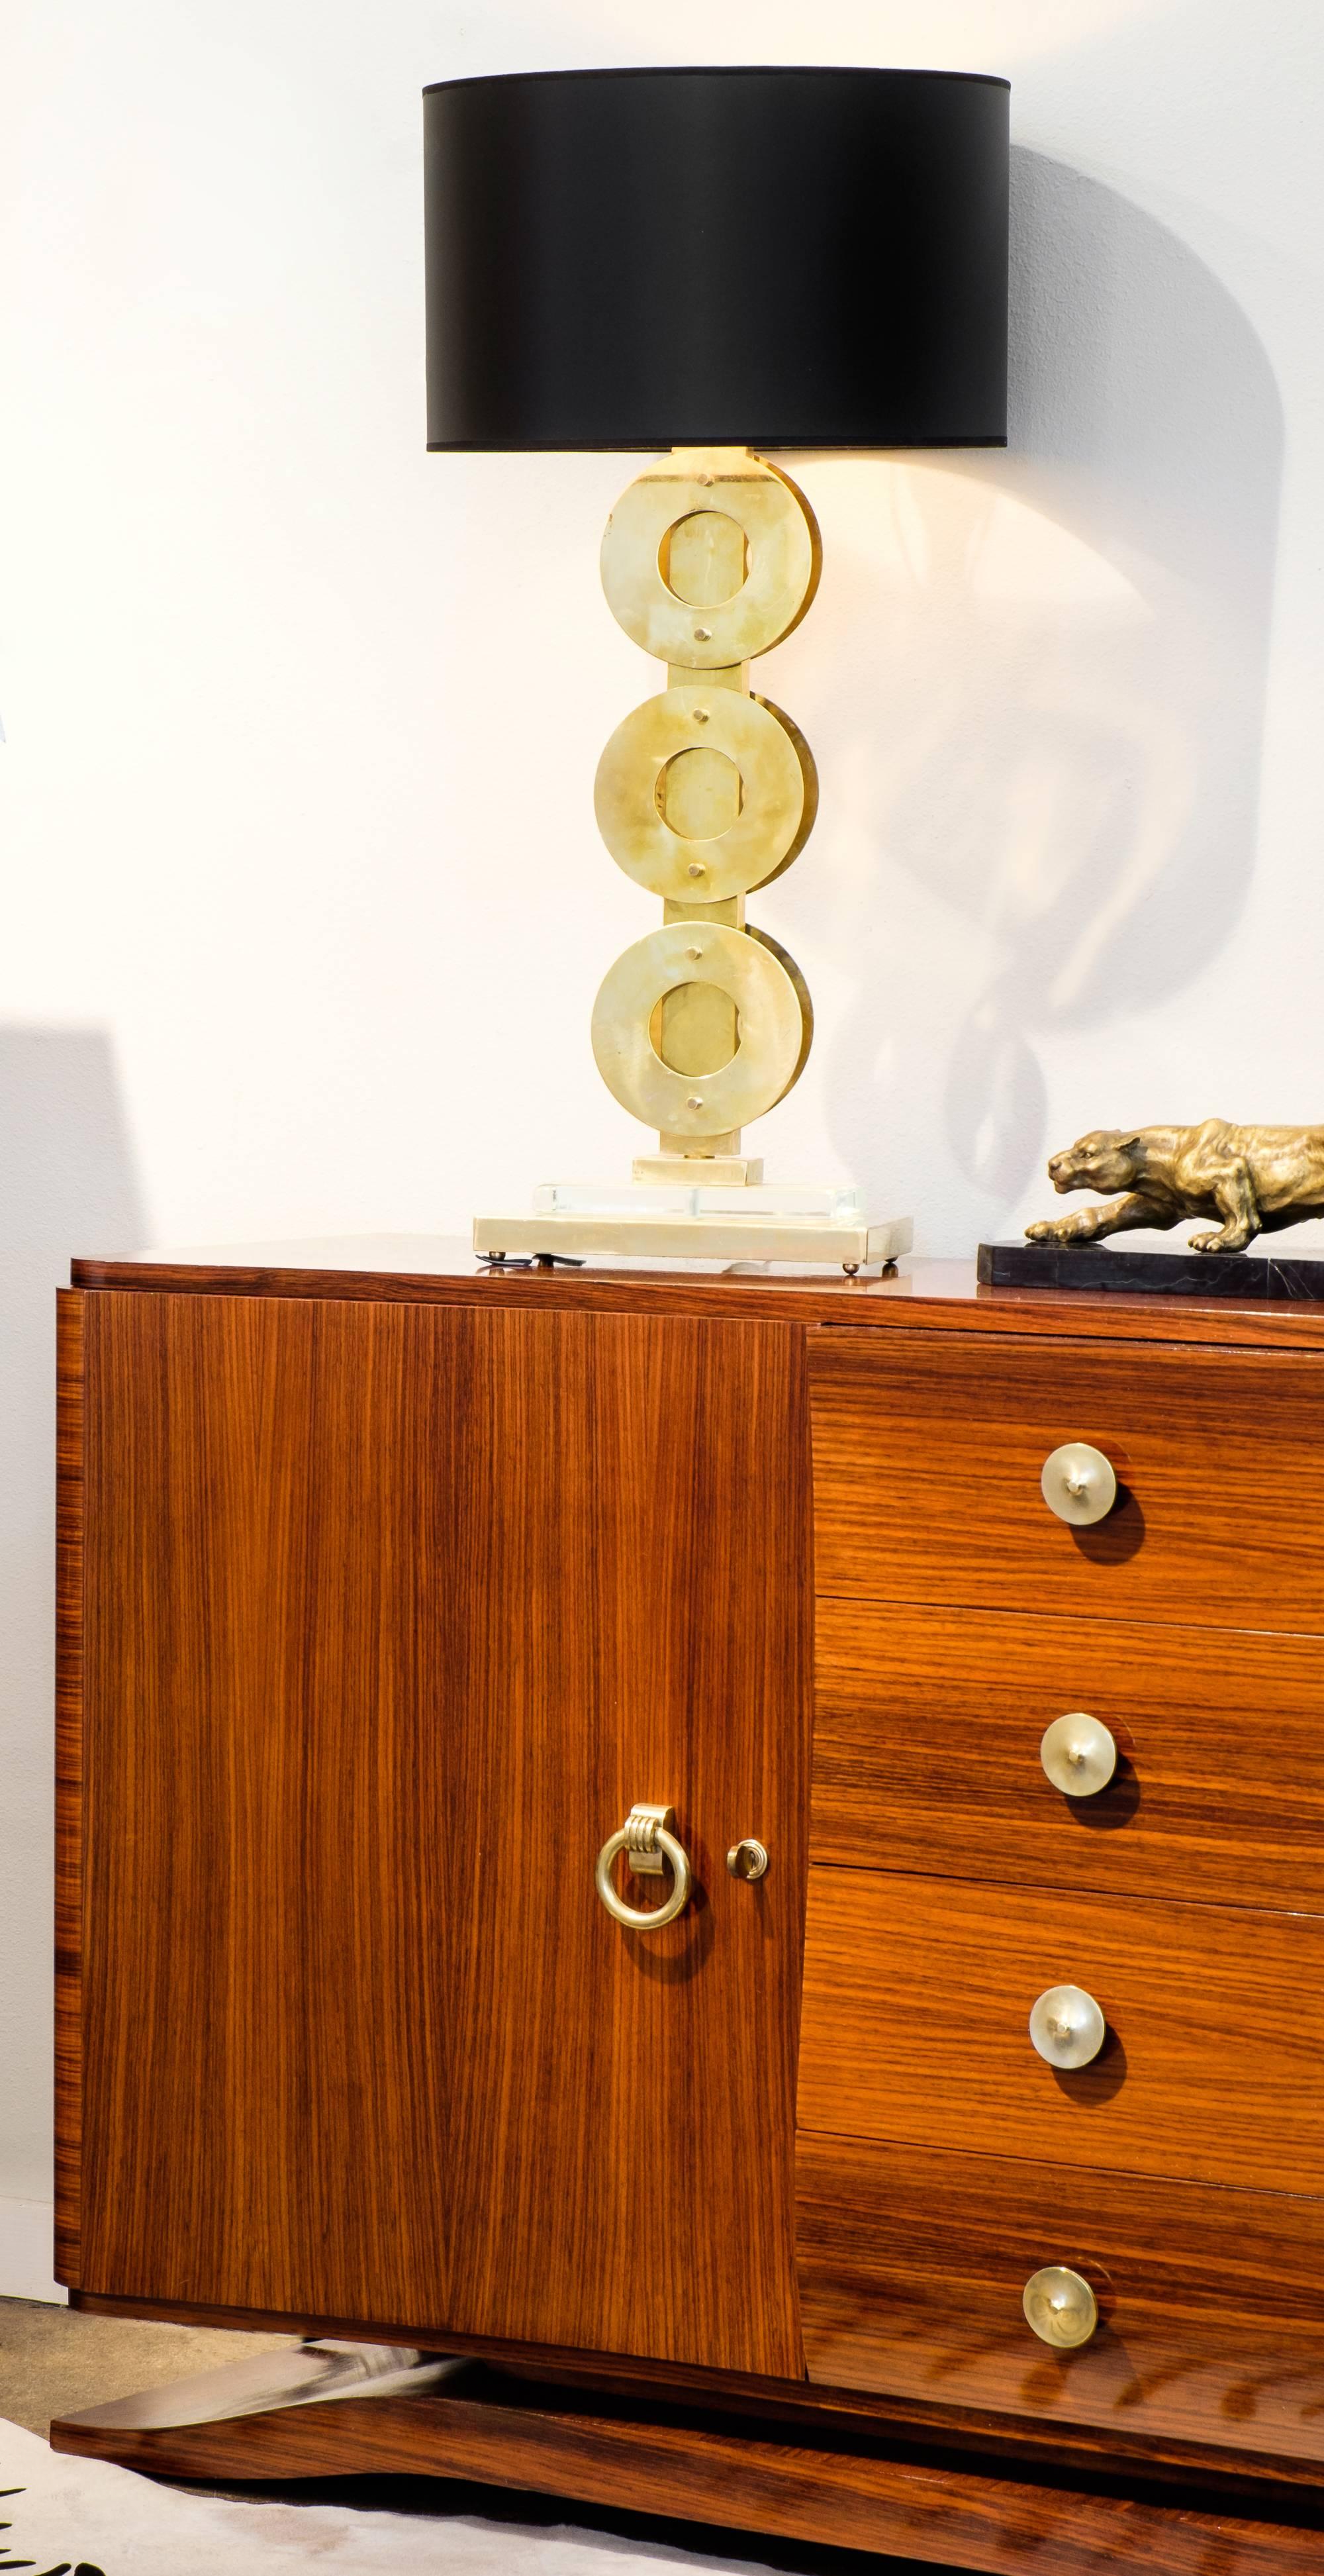 An elegant gilded brass pair of Mid-Century Modern style mounted brass circles lamps with Murano glass slabs. This gleaming duo creates a glamorous and golden glow in any interior which they are placed. We love their height which creates a dramatic